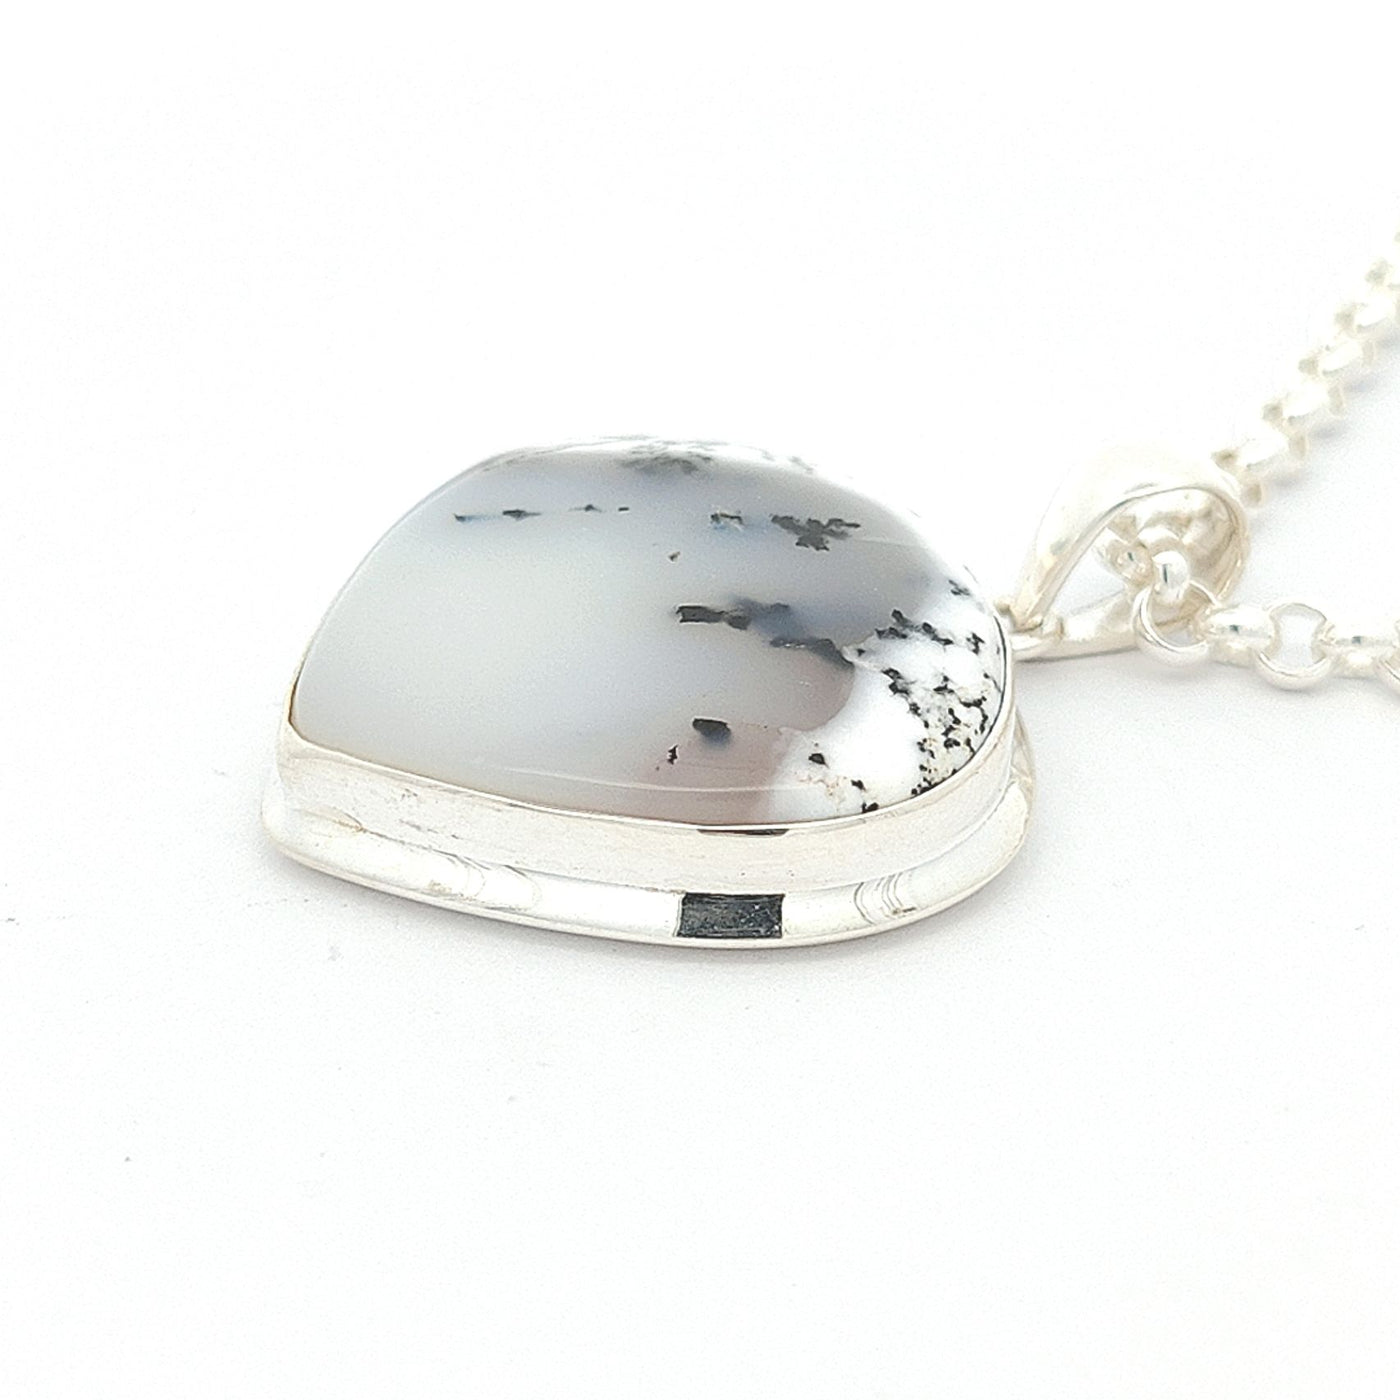 Dendritic Agate Pendant - Snow - boothandbooth